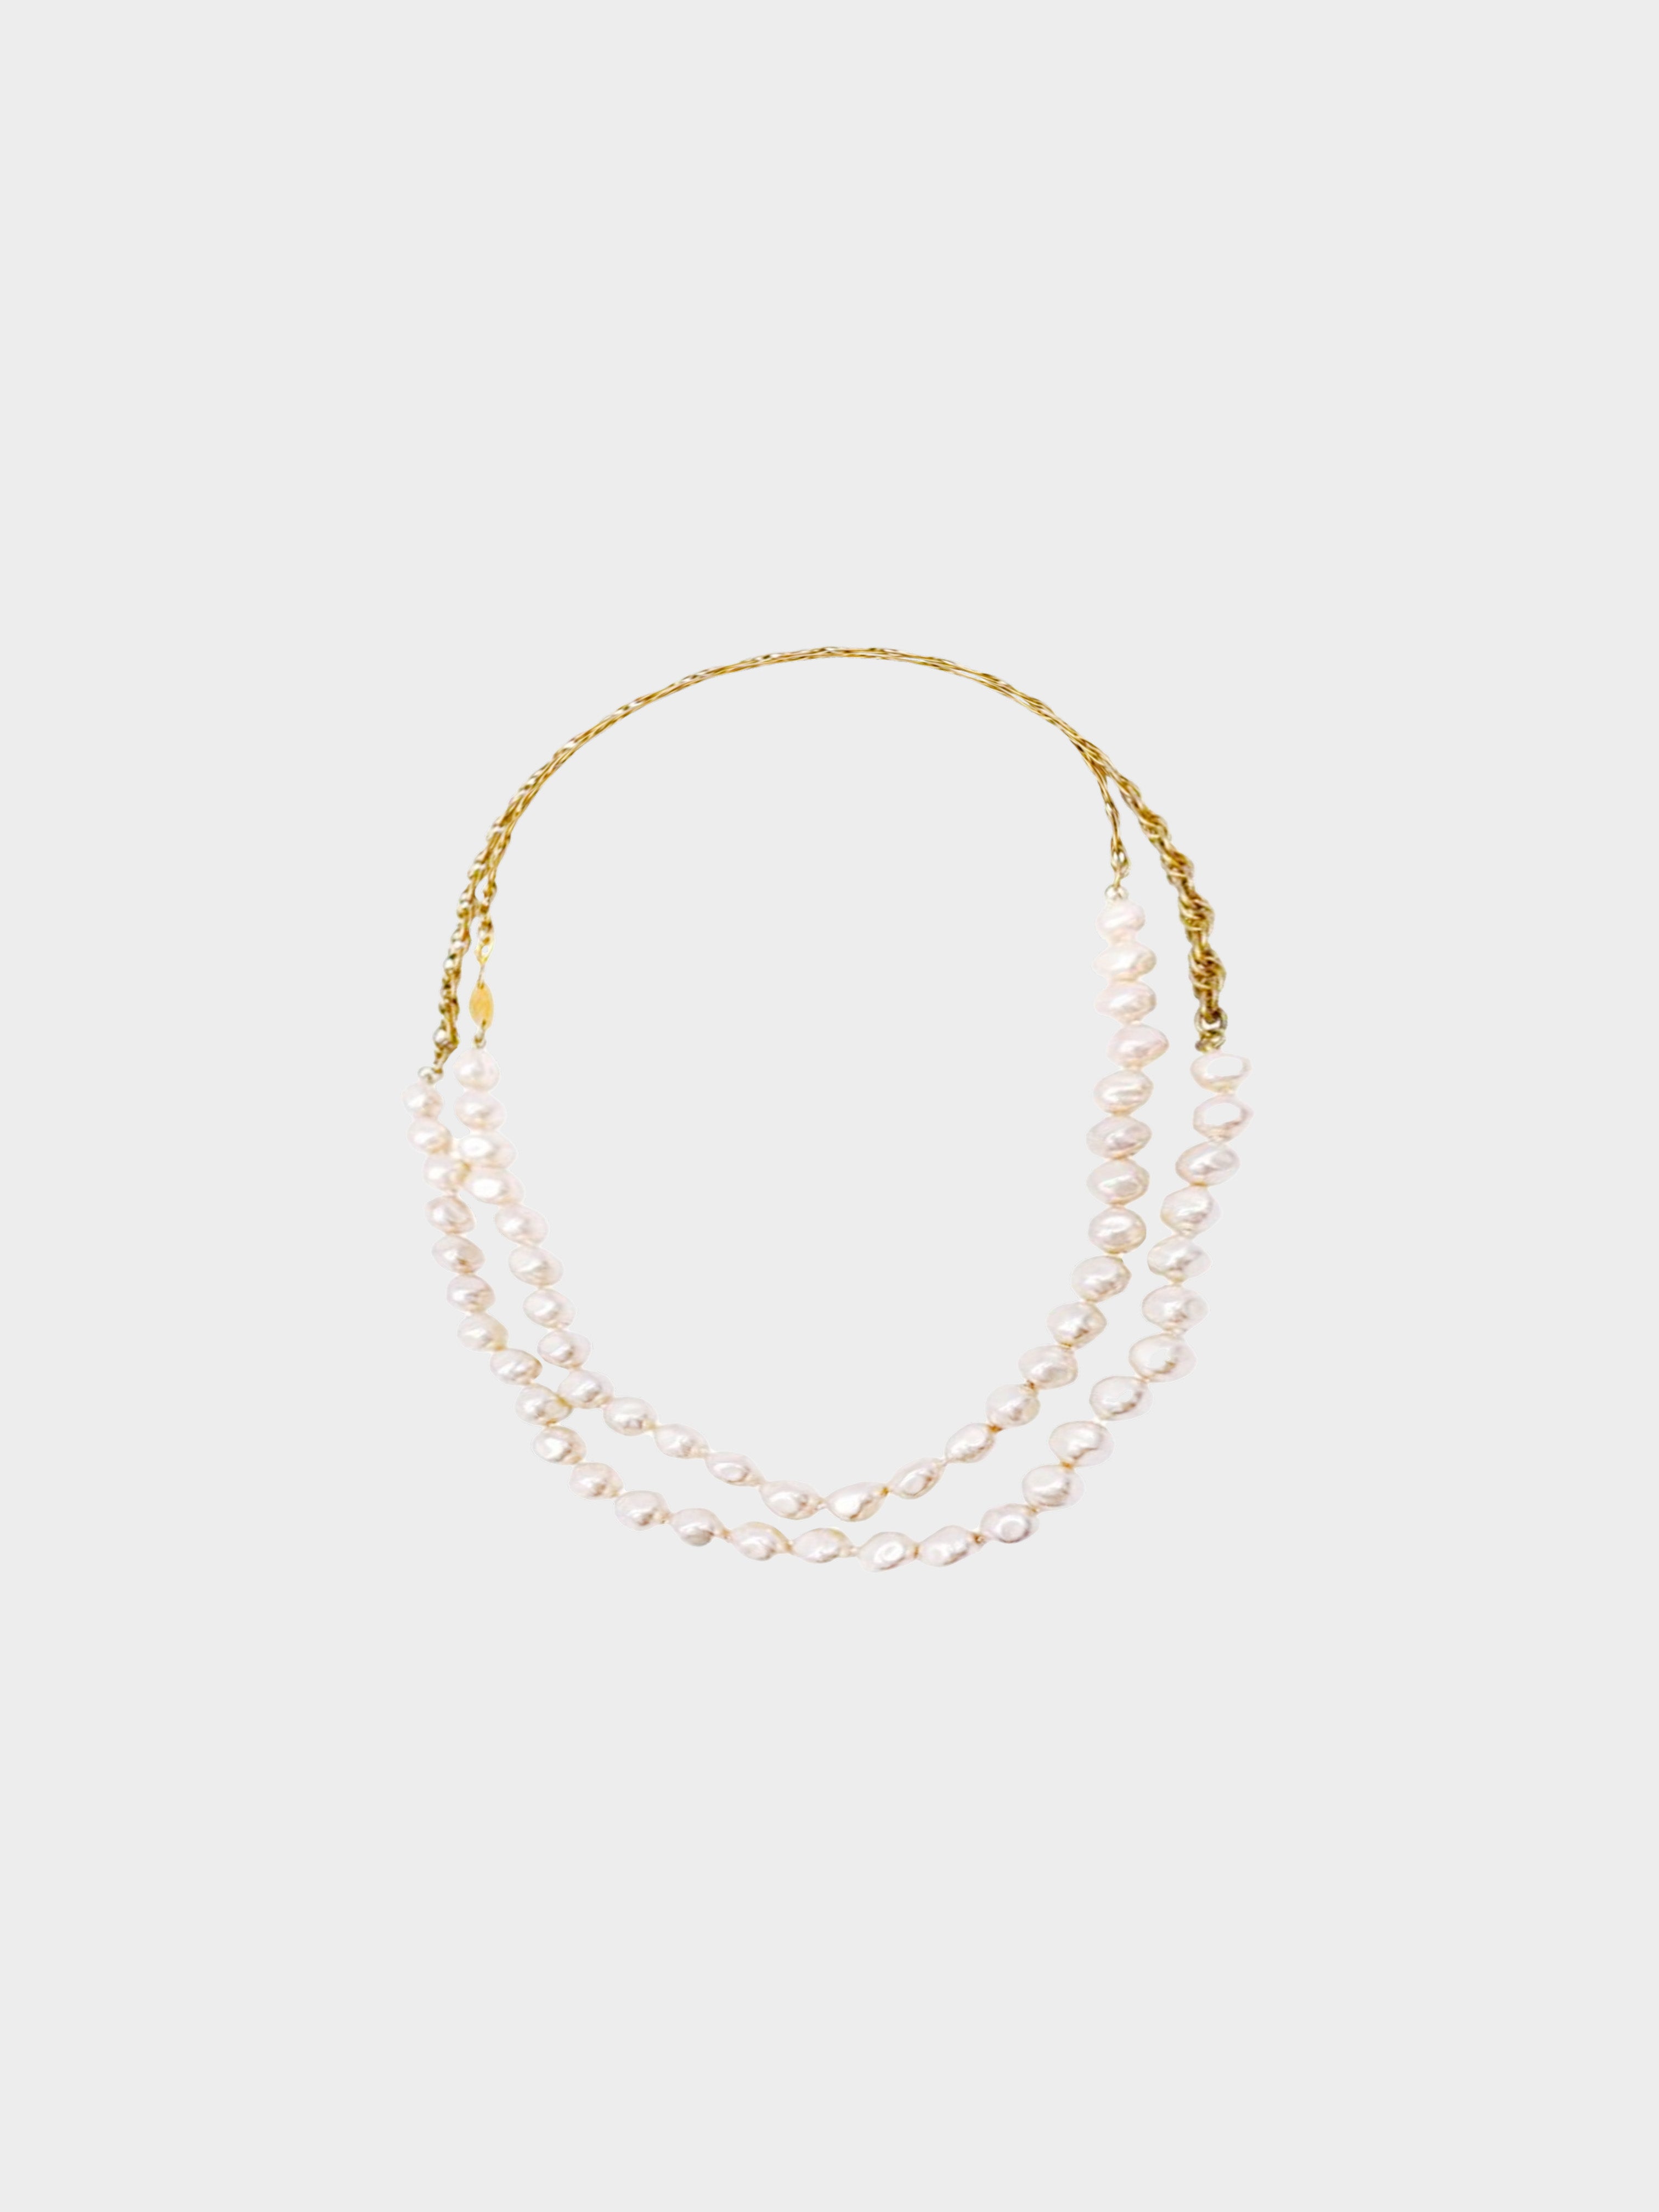 Chanel Necklace Choker Pearl Pendant Light Gold With Leather 21A